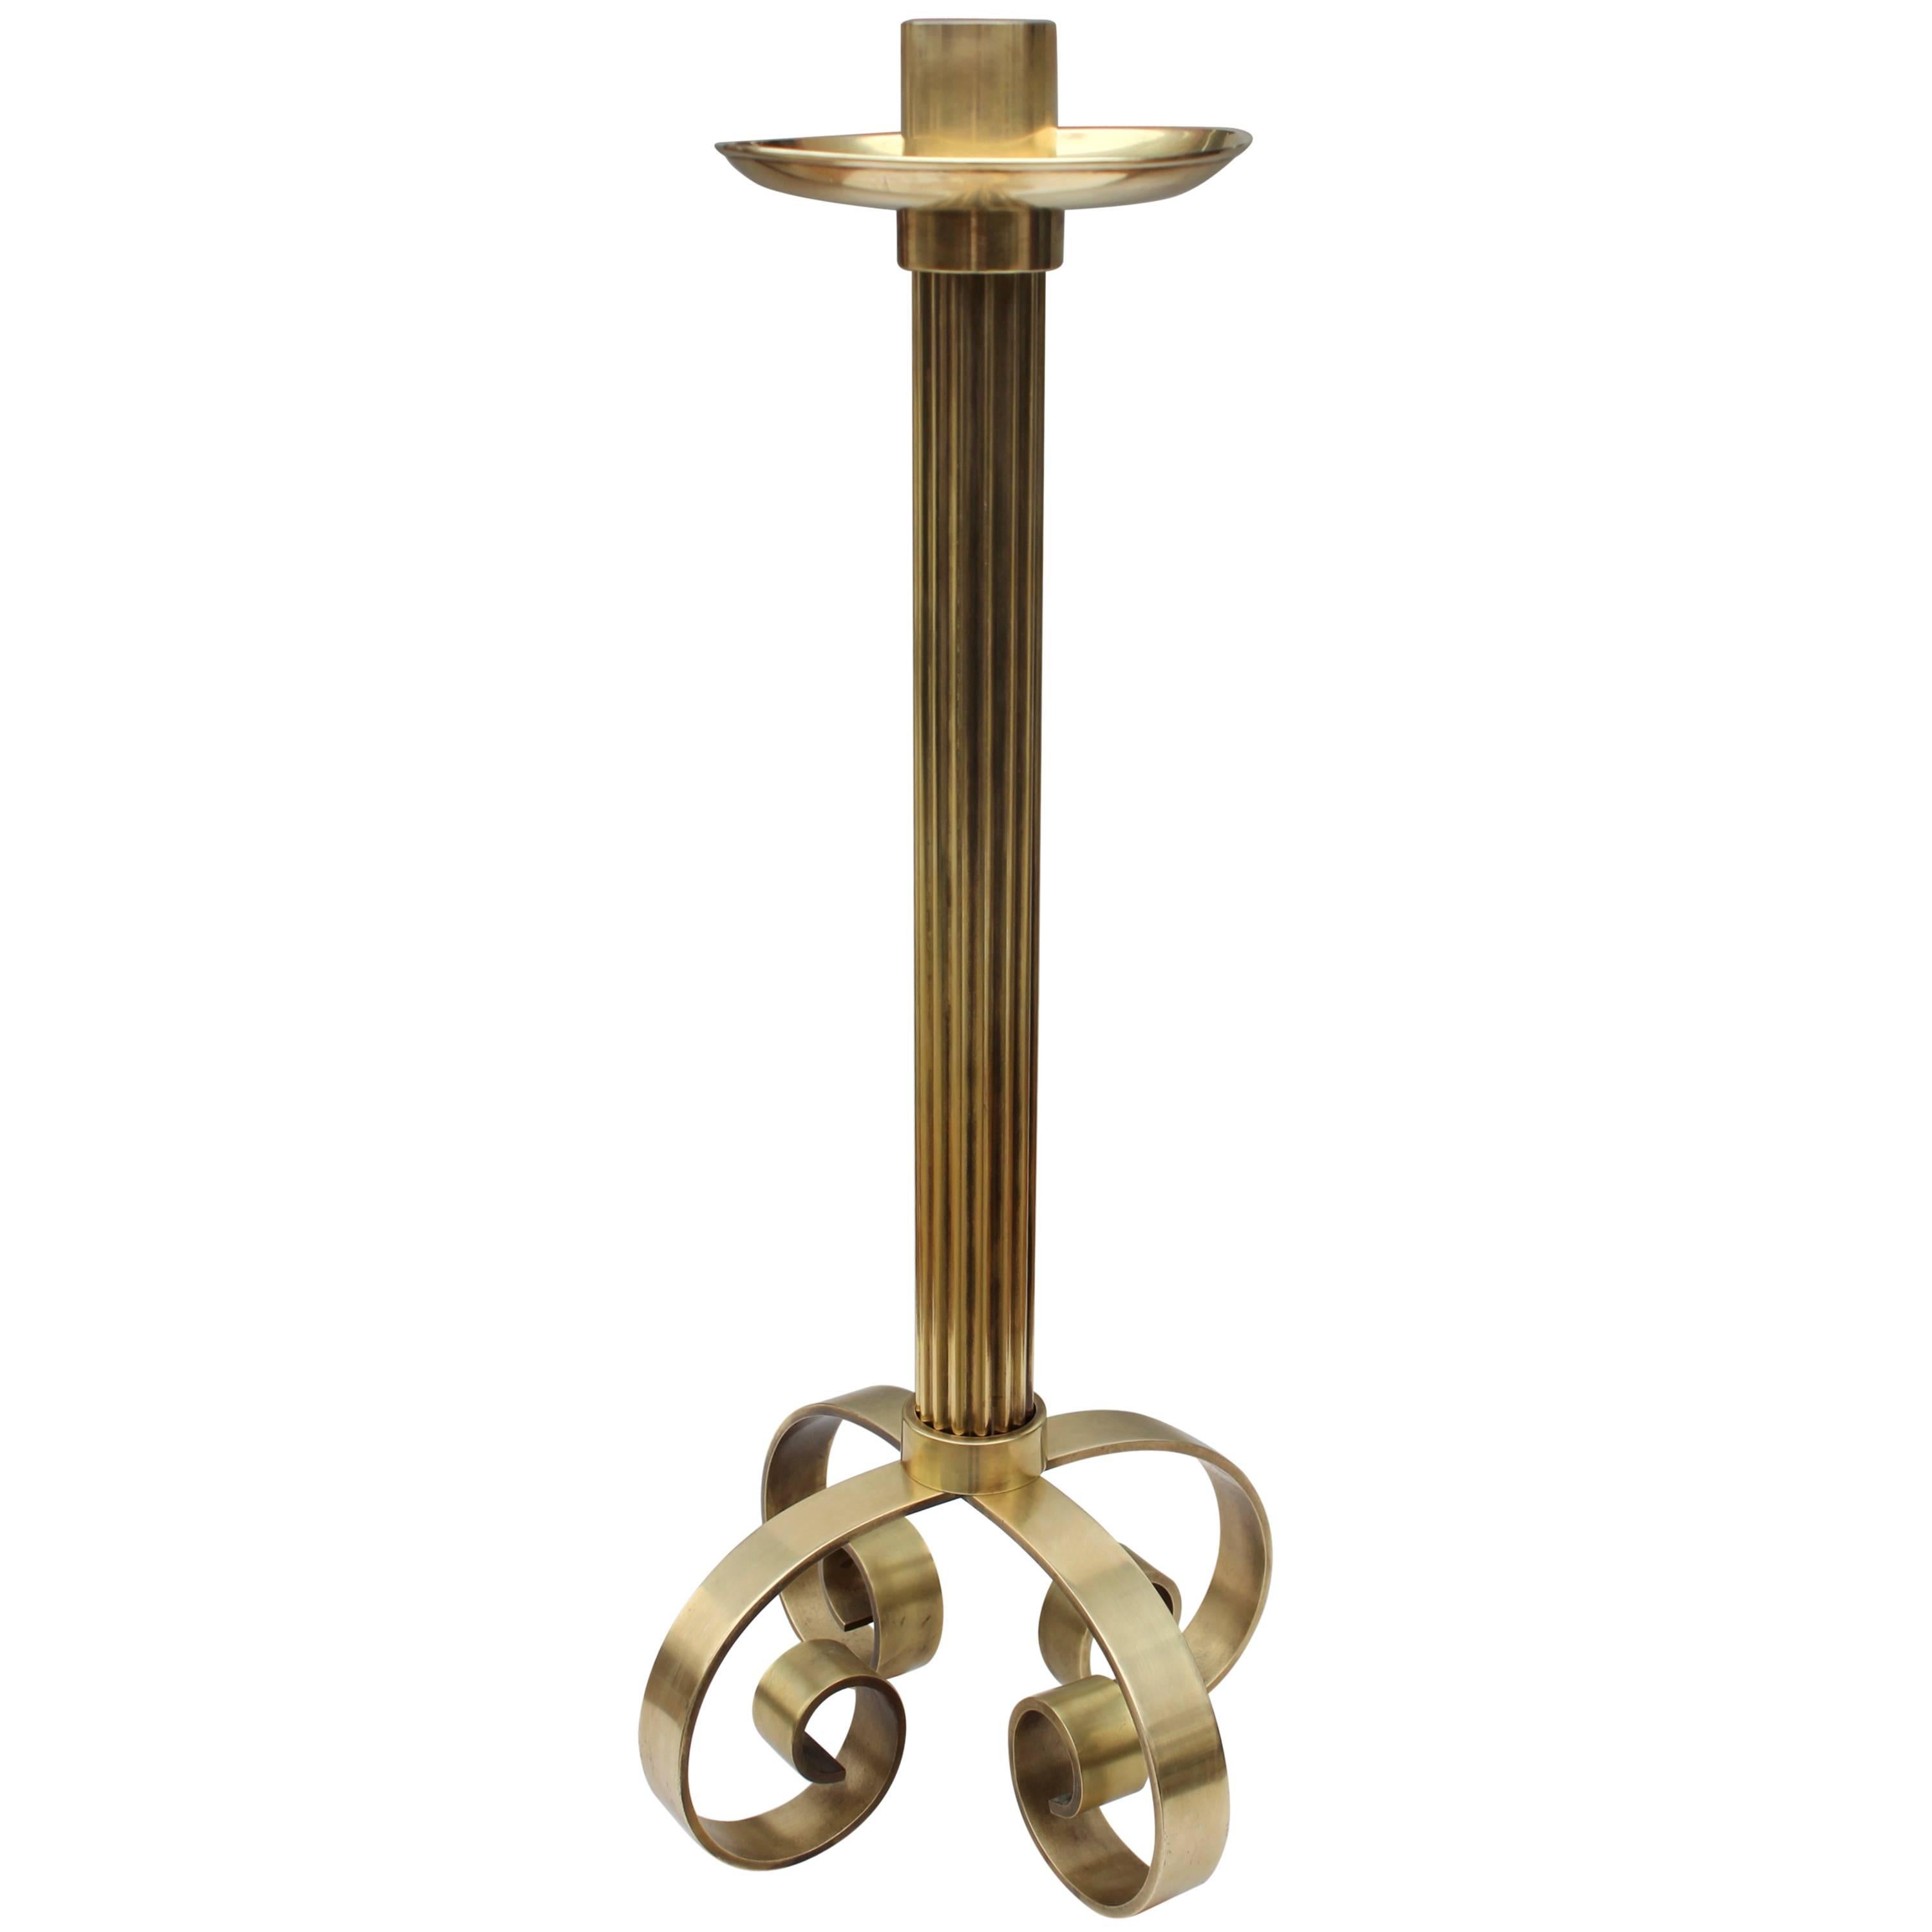 1940s Ystad Metall Large Brass Candle Holder For Sale